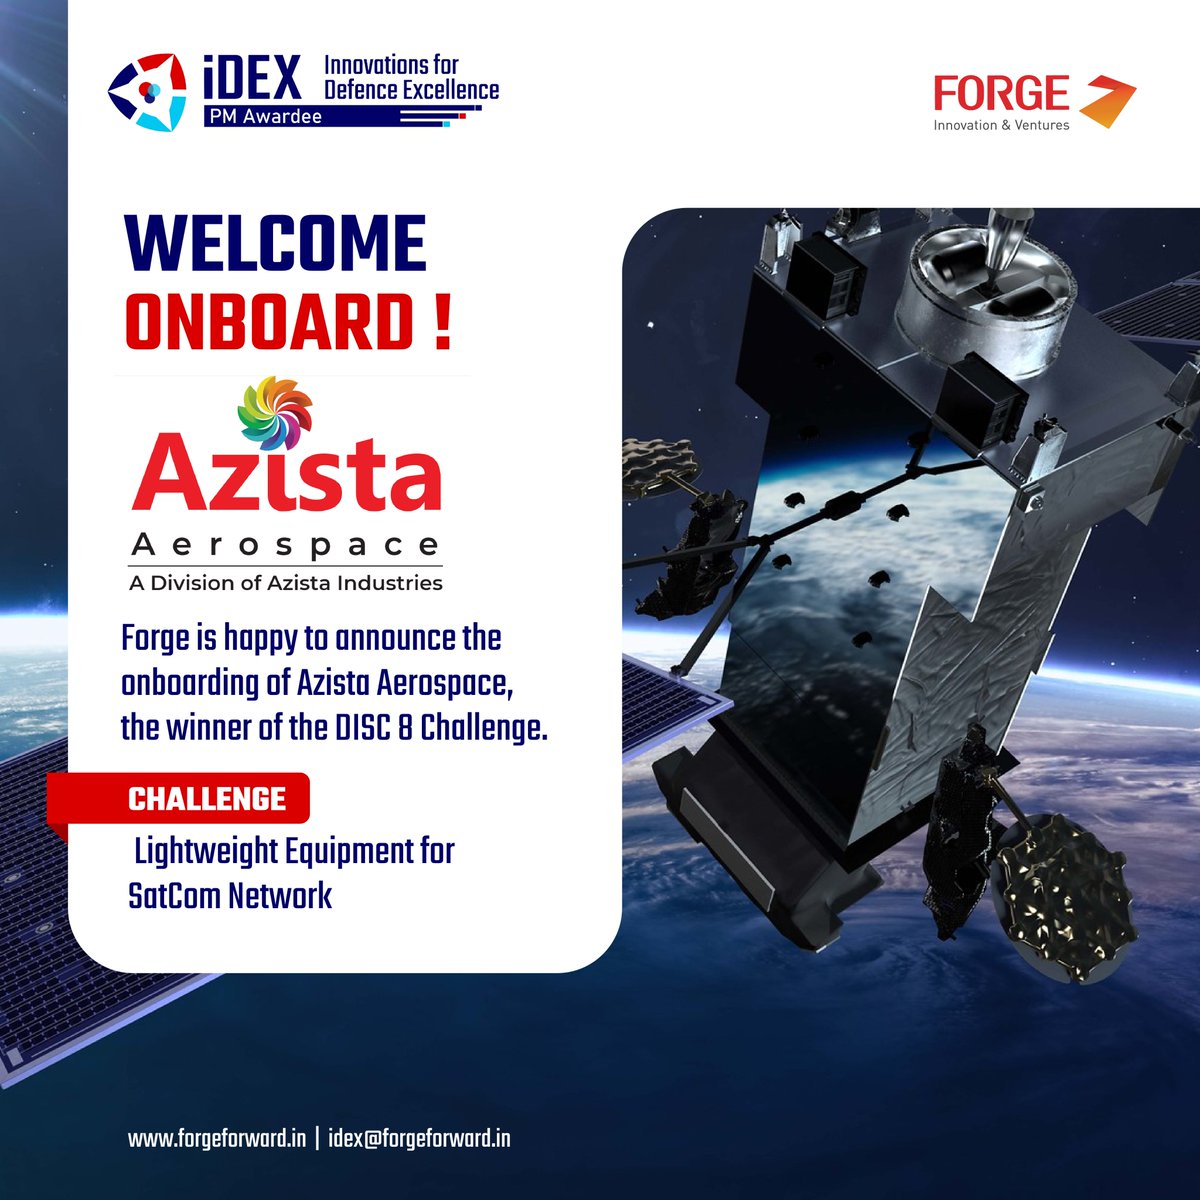 We are delighted to share that Azista Aerospace has chosen to partner with Forge for the DISC 8 Challenge Light Weight, Multiband SATCOM (UHF/ S/ C/ Ku/ Ka) SDR for Ships, Submarines, and Aircraft.

#AerospaceInnovation #SatelliteCommunication #DeepSpaceComms